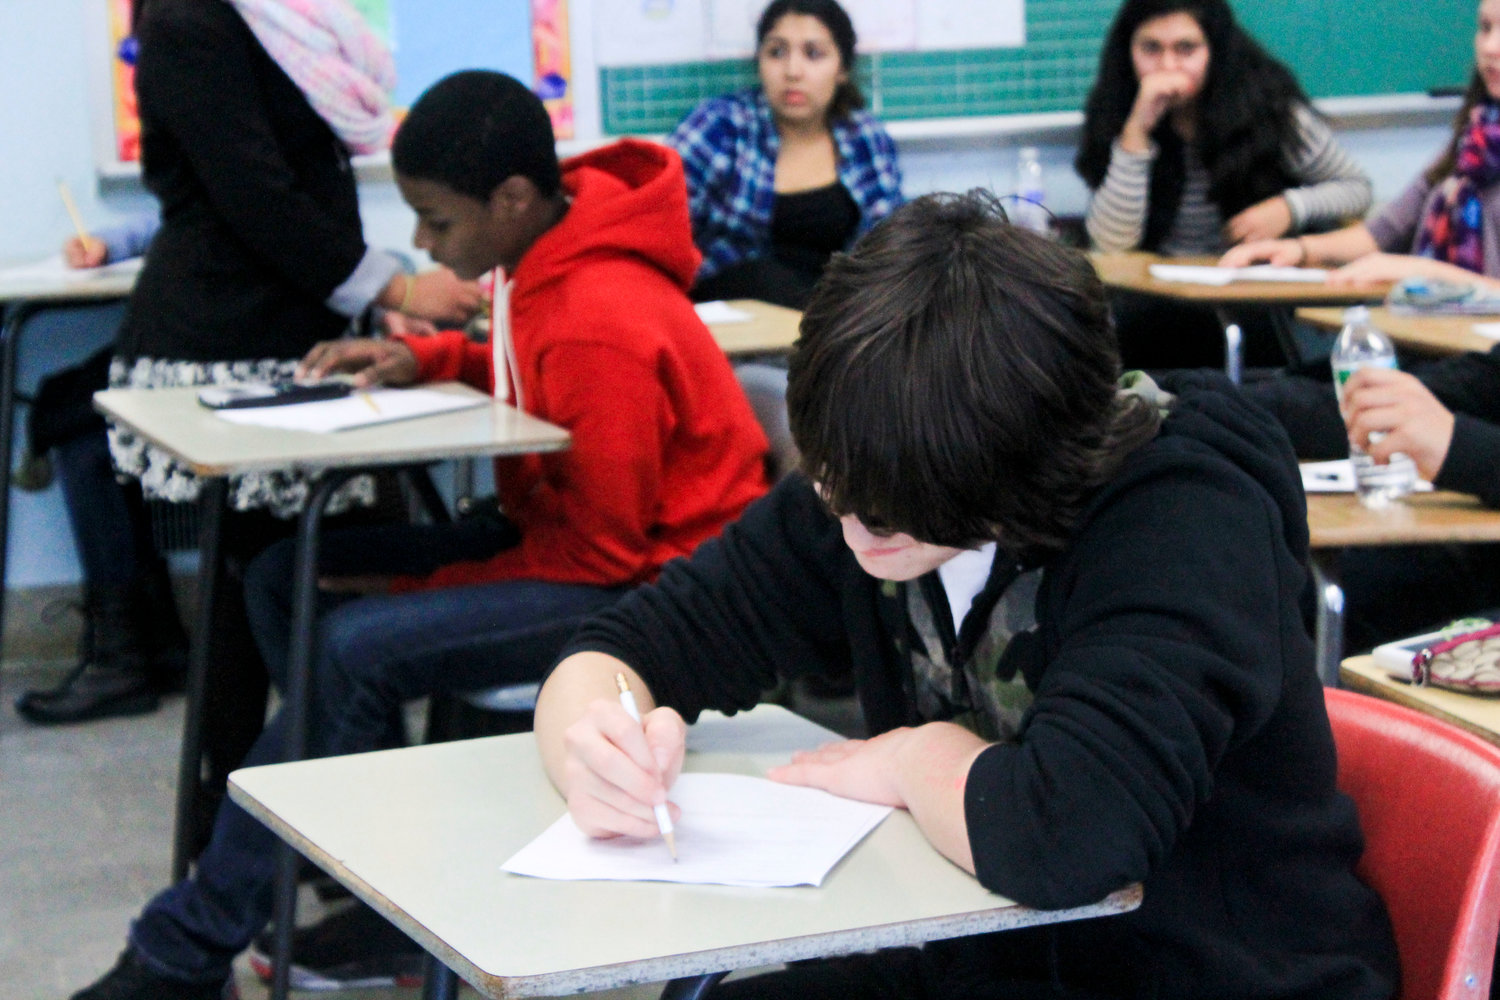 The Global History and Geography Regents is one of four exams high school students must take to earn a high school Regents diploma. The other three are math, science and English Language Arts. Above, a Lawrence High School student working on the math Regents in 2014.